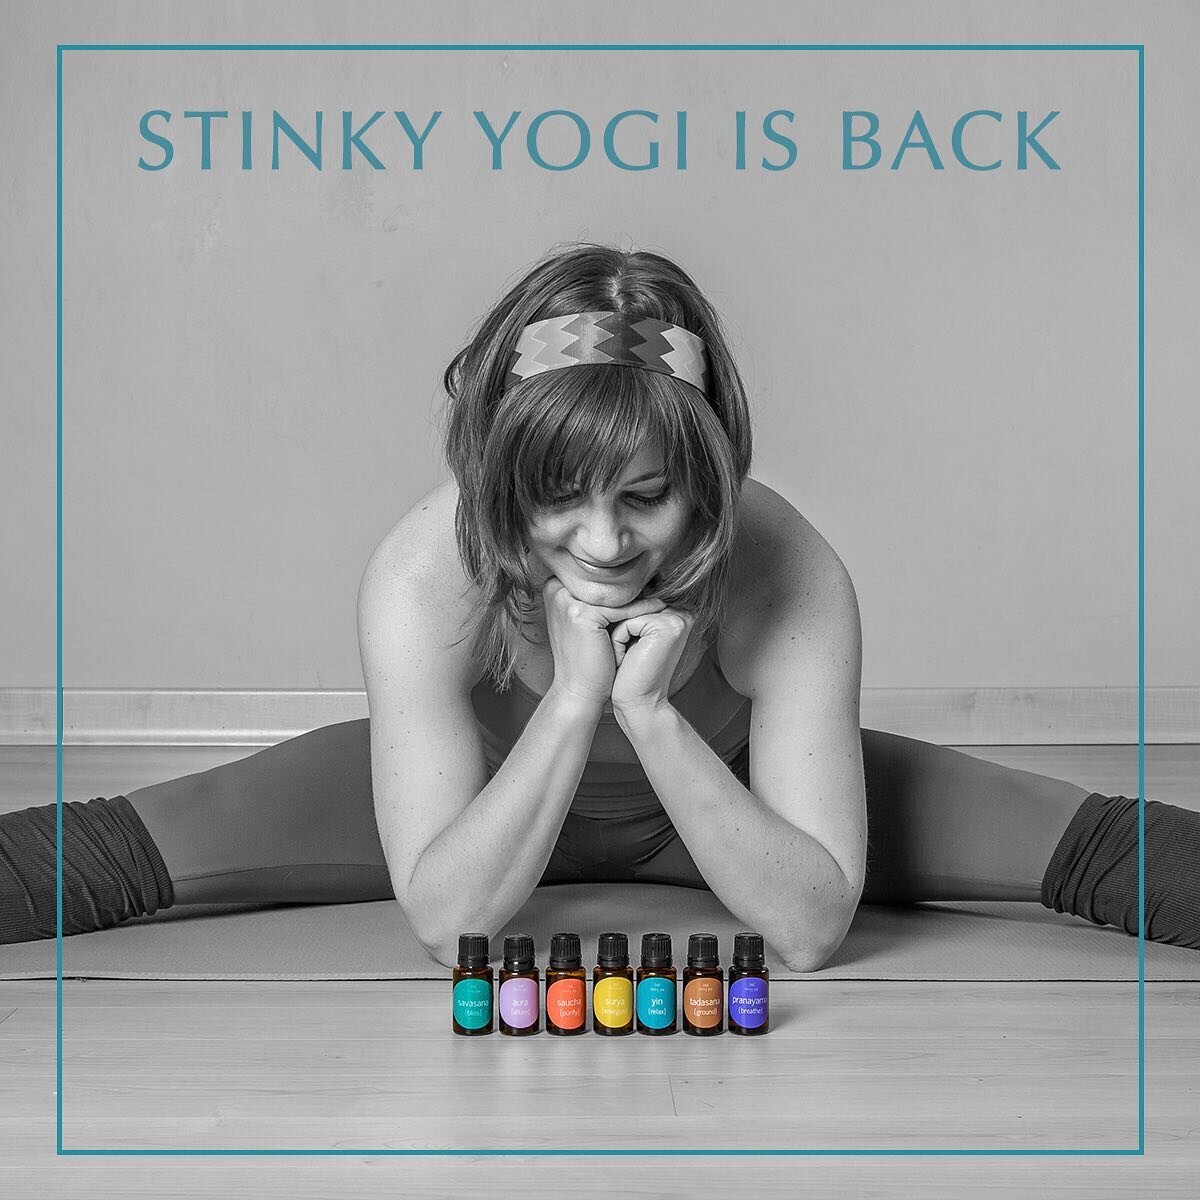 The OG lineup + our fresh new website! 🙌 (link in bio)

Our original seven essential blends and signature sprays are back!

Enjoy 48 hours of free shipping with code &lsquo;STINKYISBACK&rsquo;

#bringingstinkyback #stinkyyogi #yogainspired #aromathe